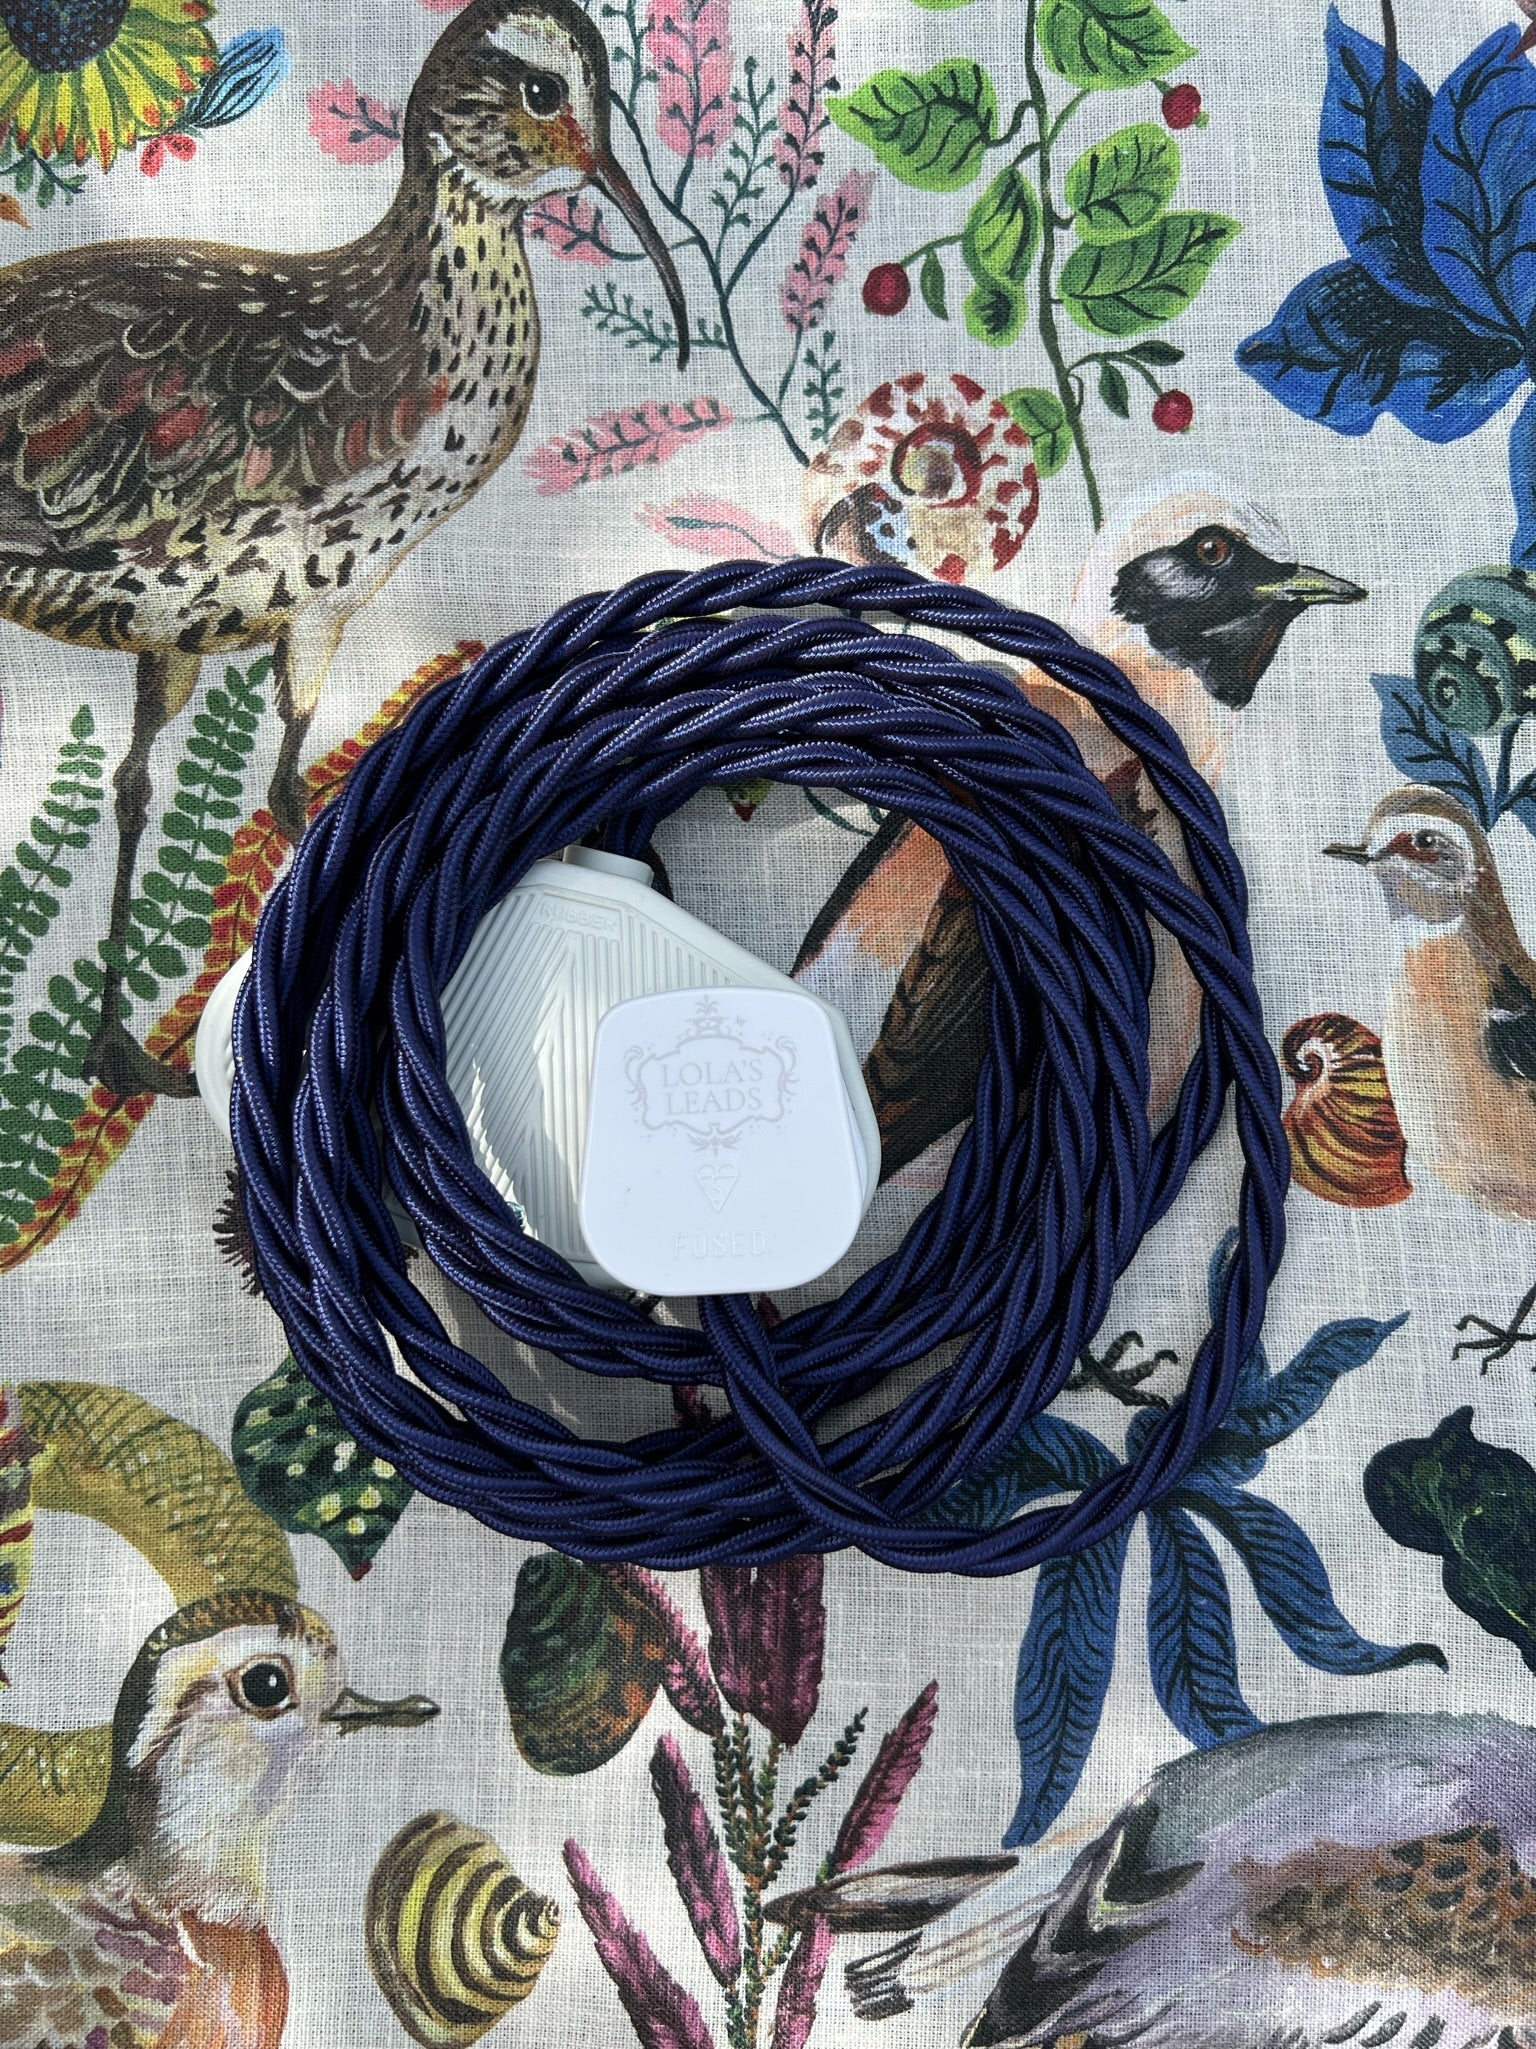 Lola's Leads Indigo Blue Fabric Covered Extension Cable